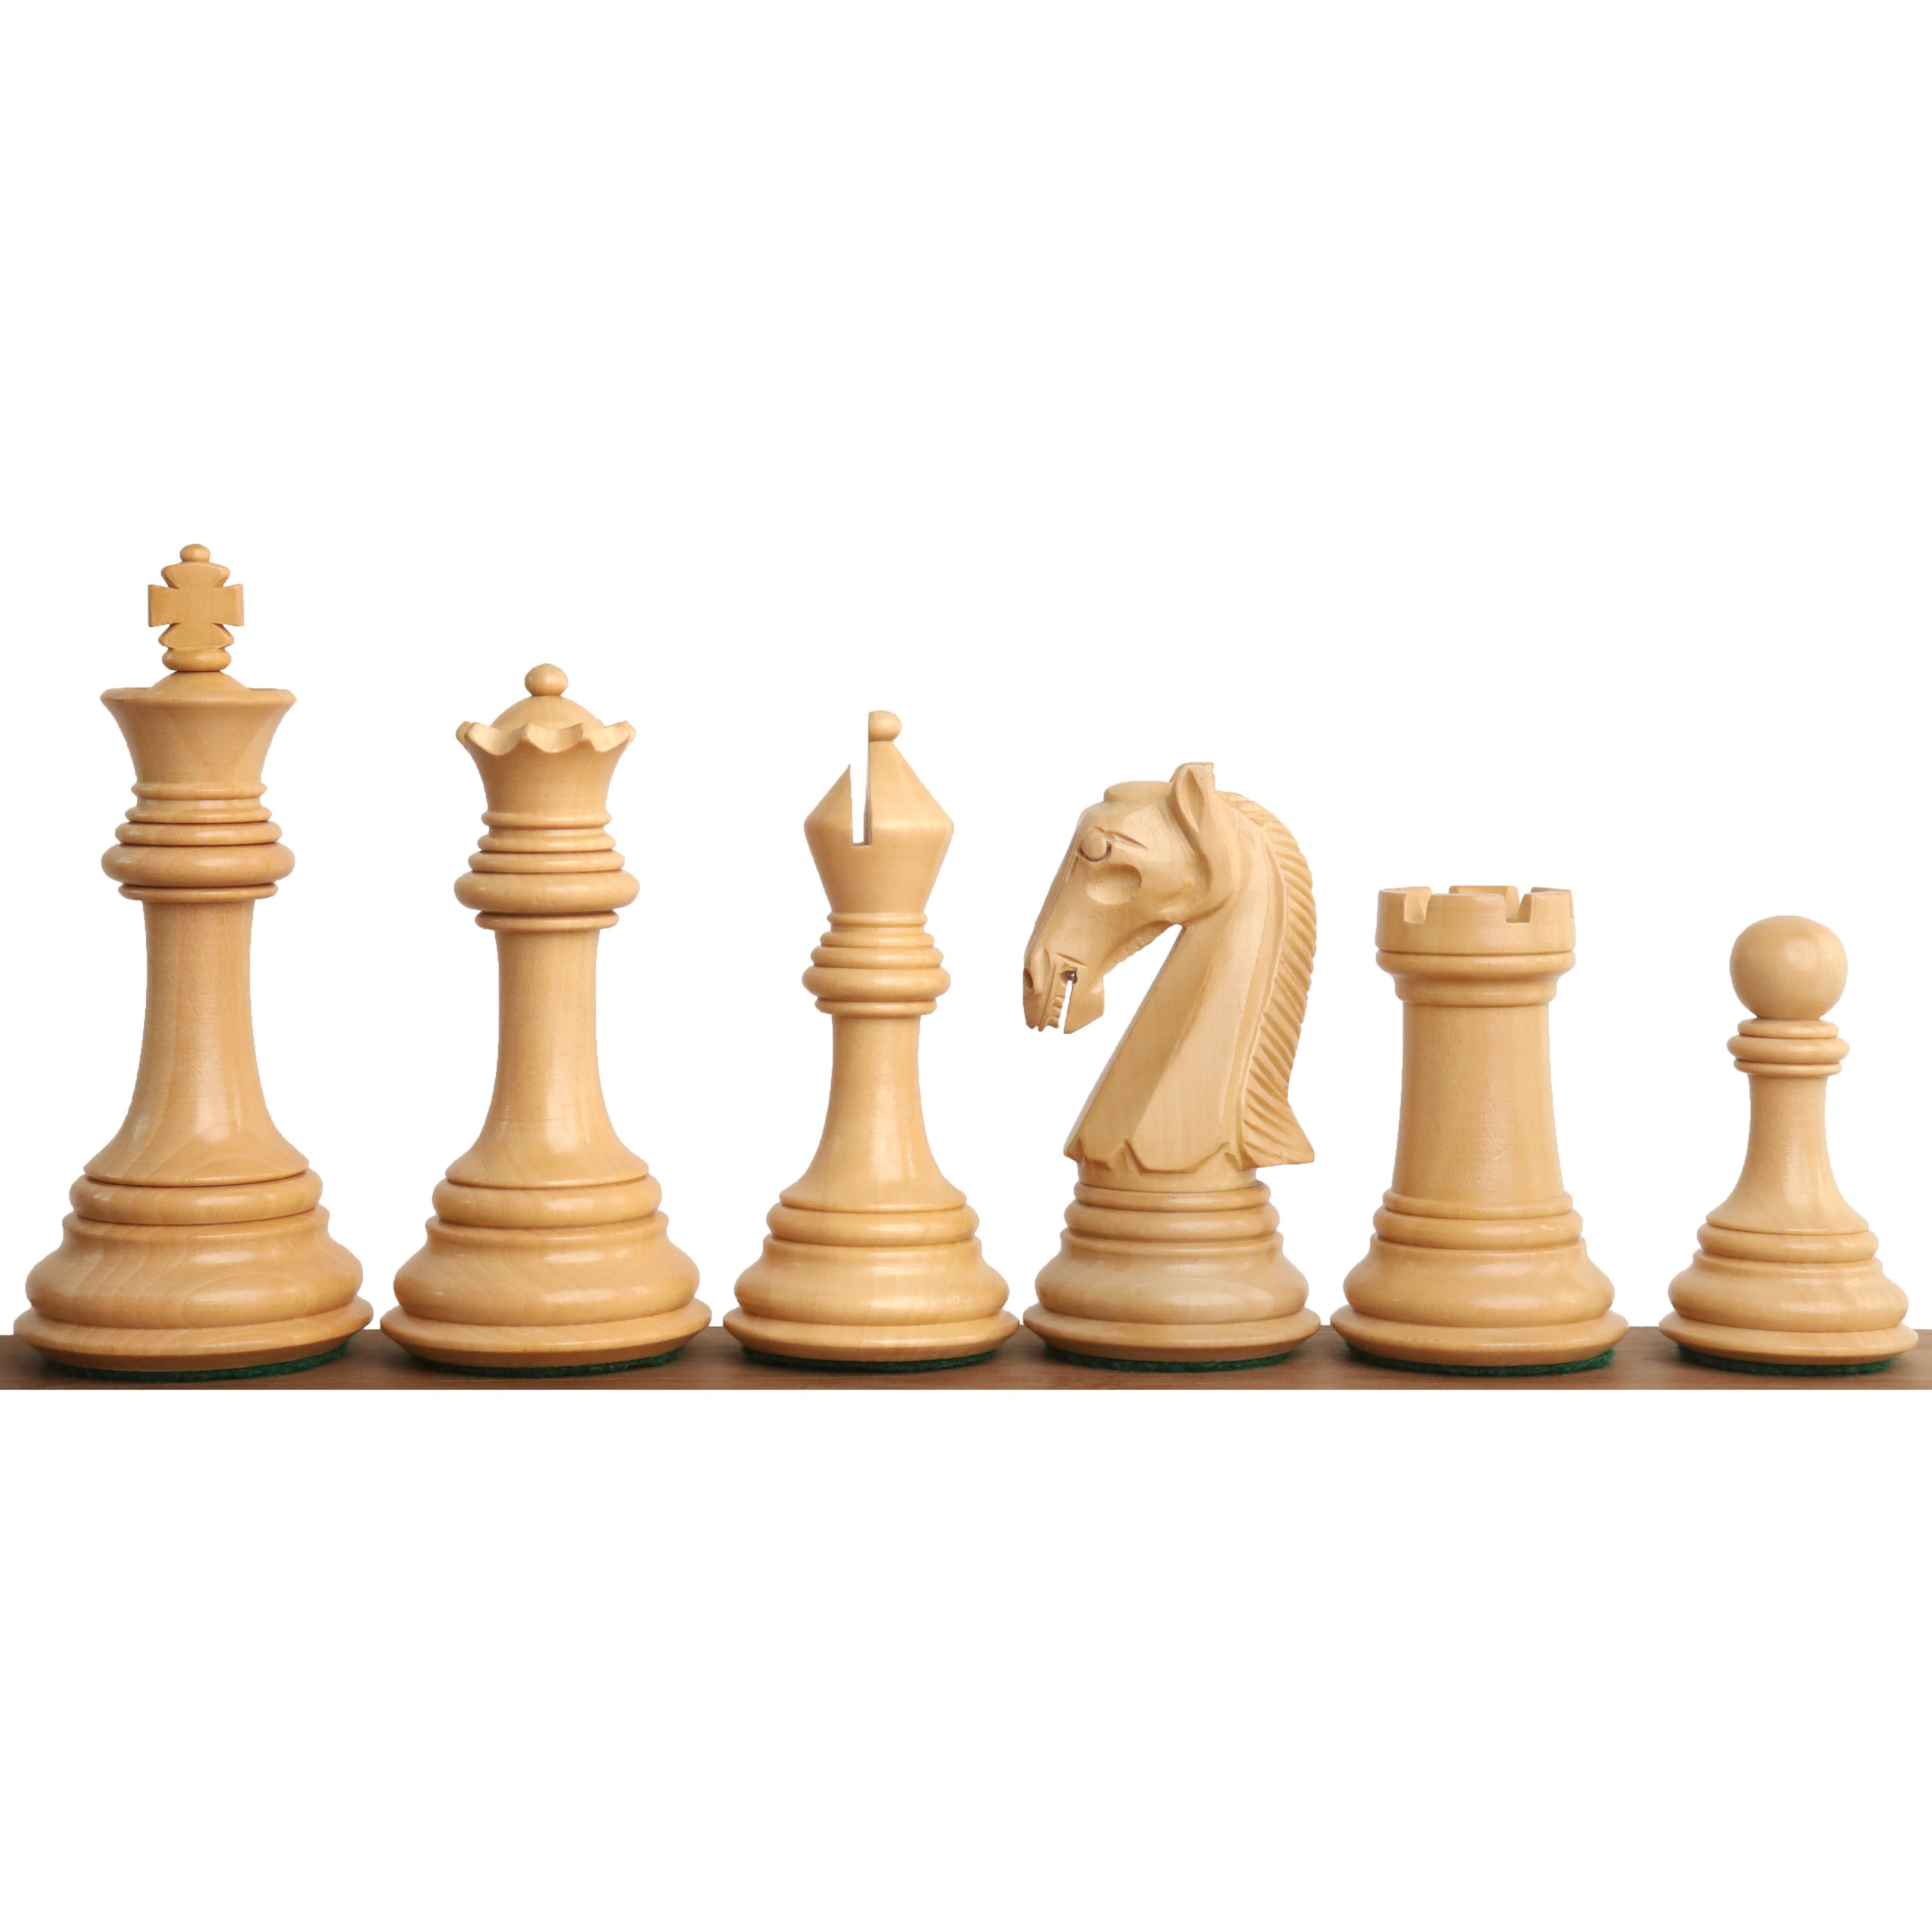 3.9" New Columbian Staunton Chess Set- Chess Pieces Only - Bud Rosewood - Double Weighted